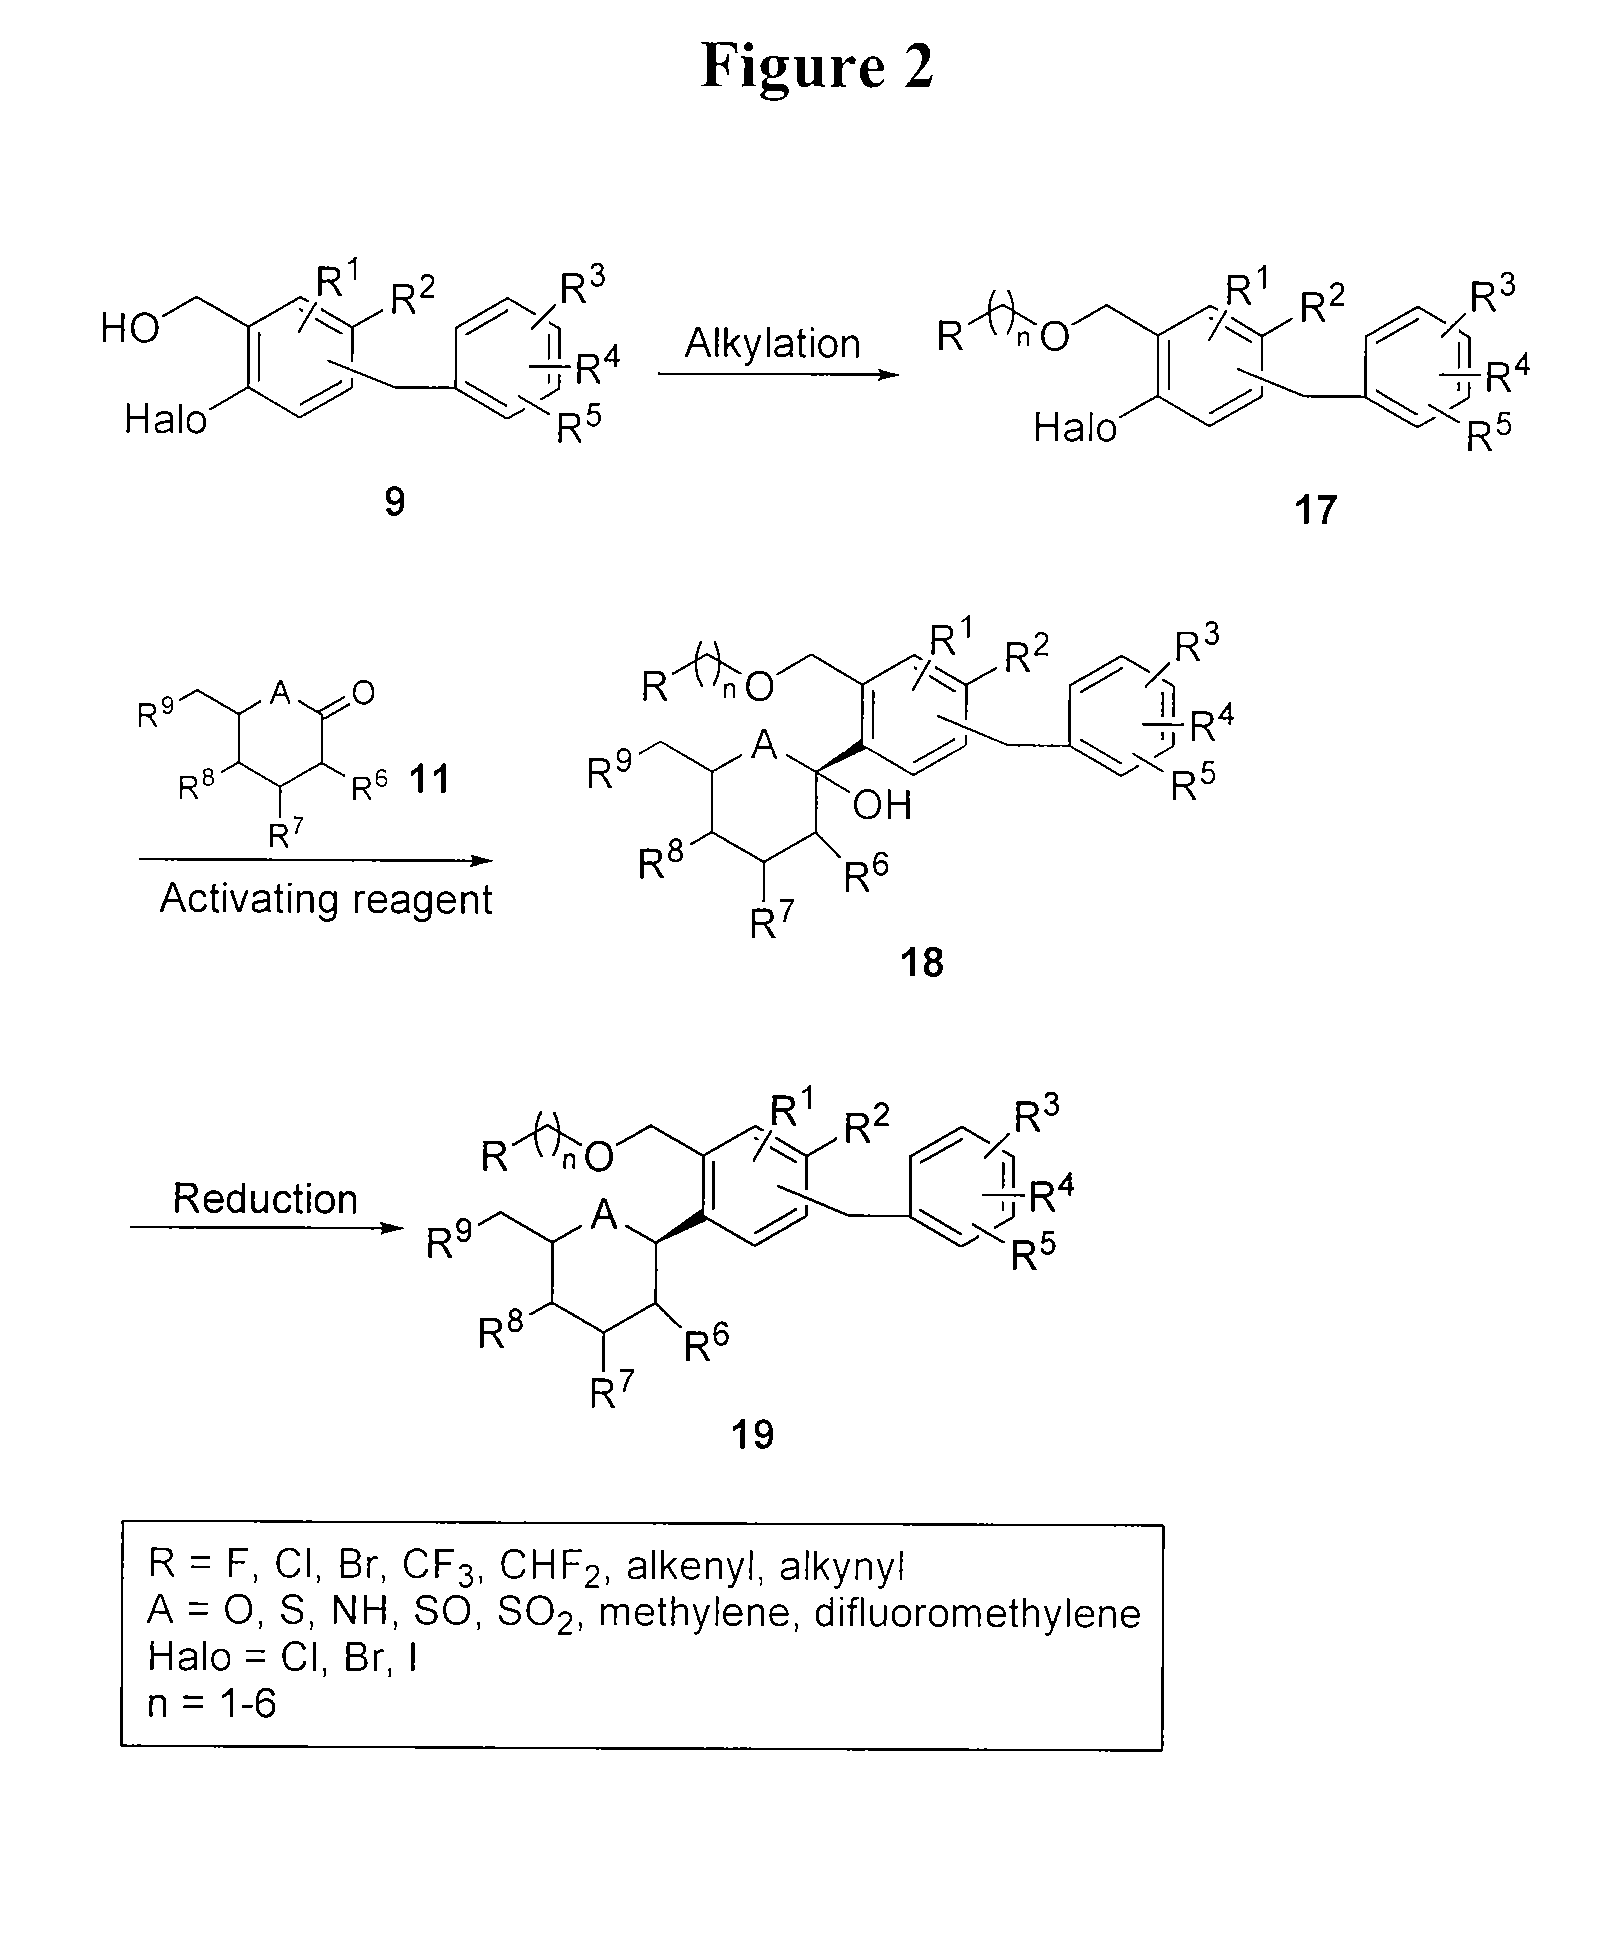 Benzylic glycoside derivatives and methods of use